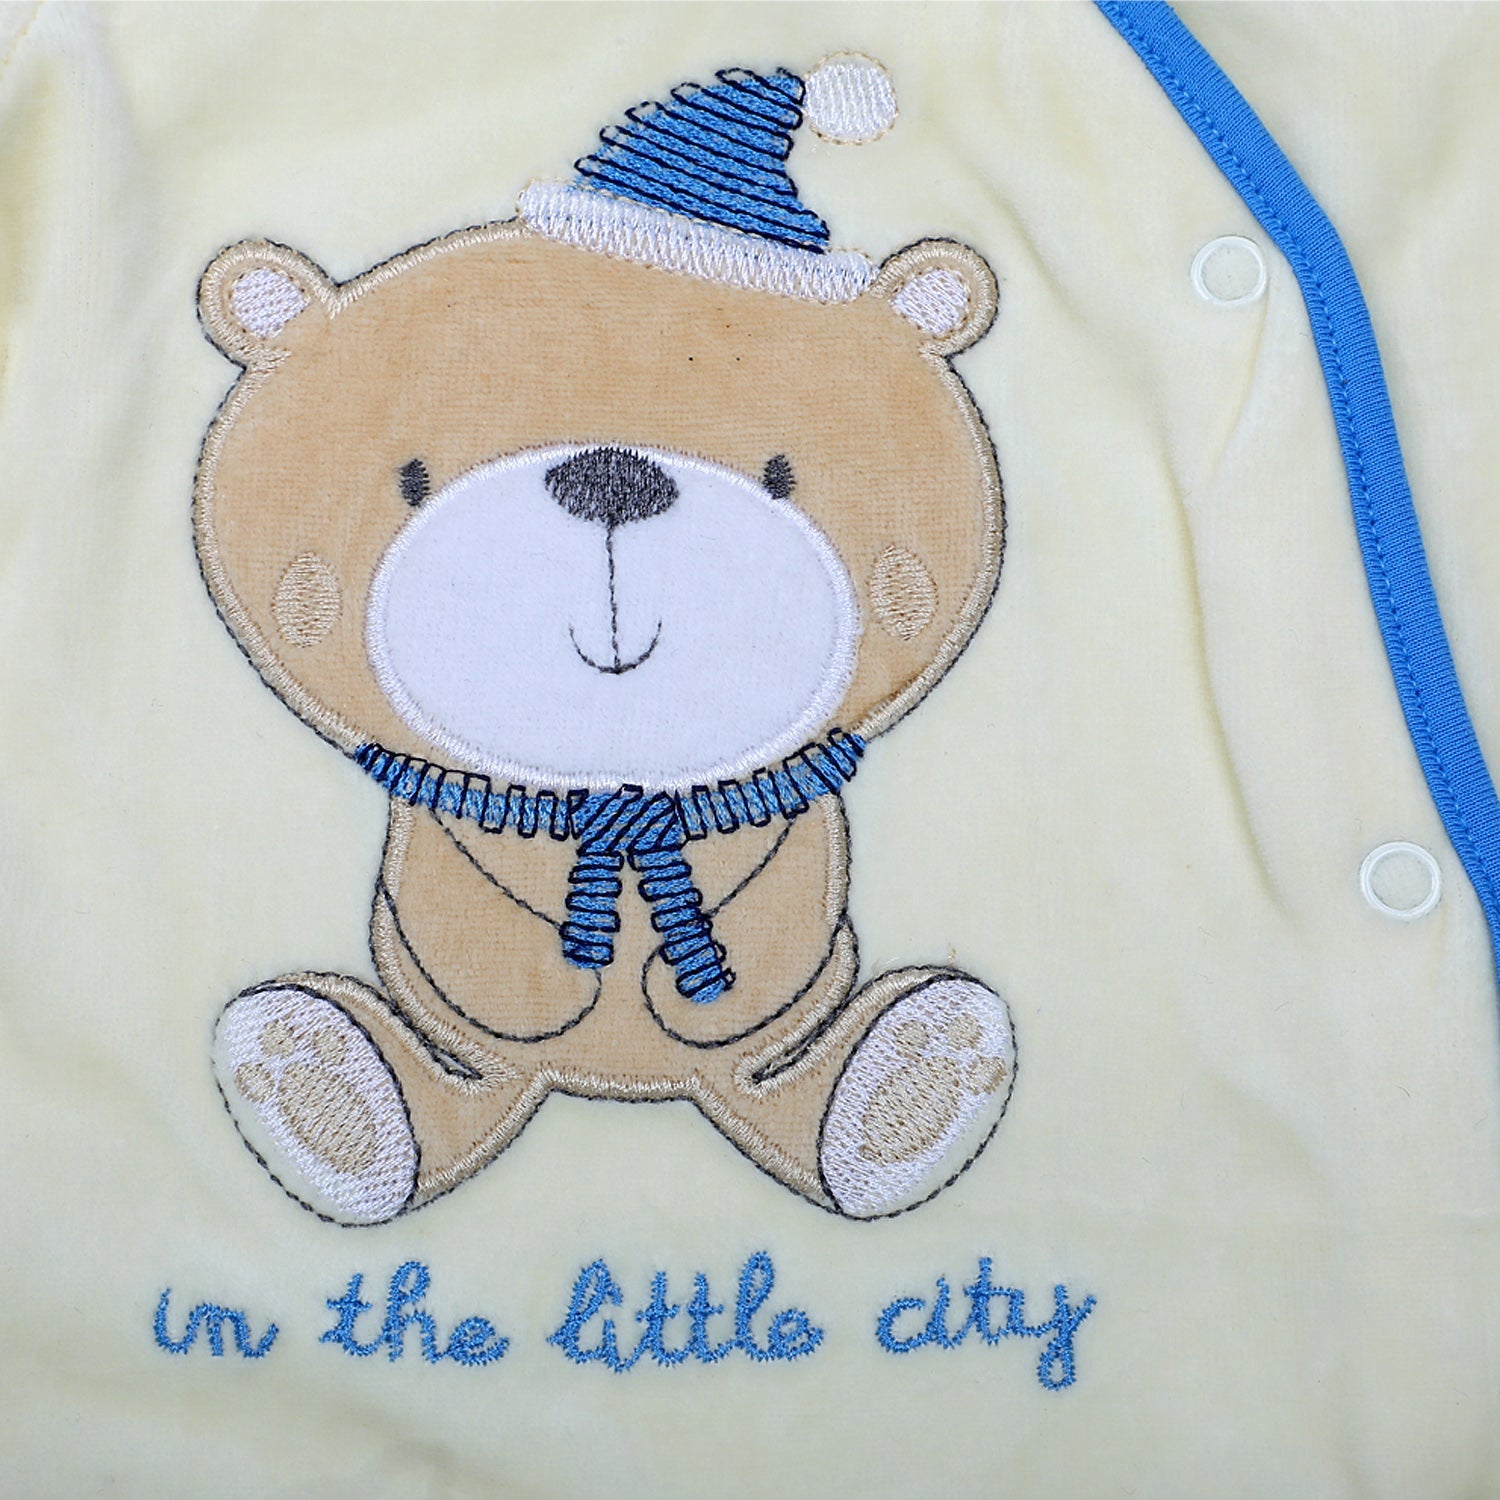 Bear In The City Infant Full Sleeves Snap Button Bodysuit Romper - Yellow - Baby Moo